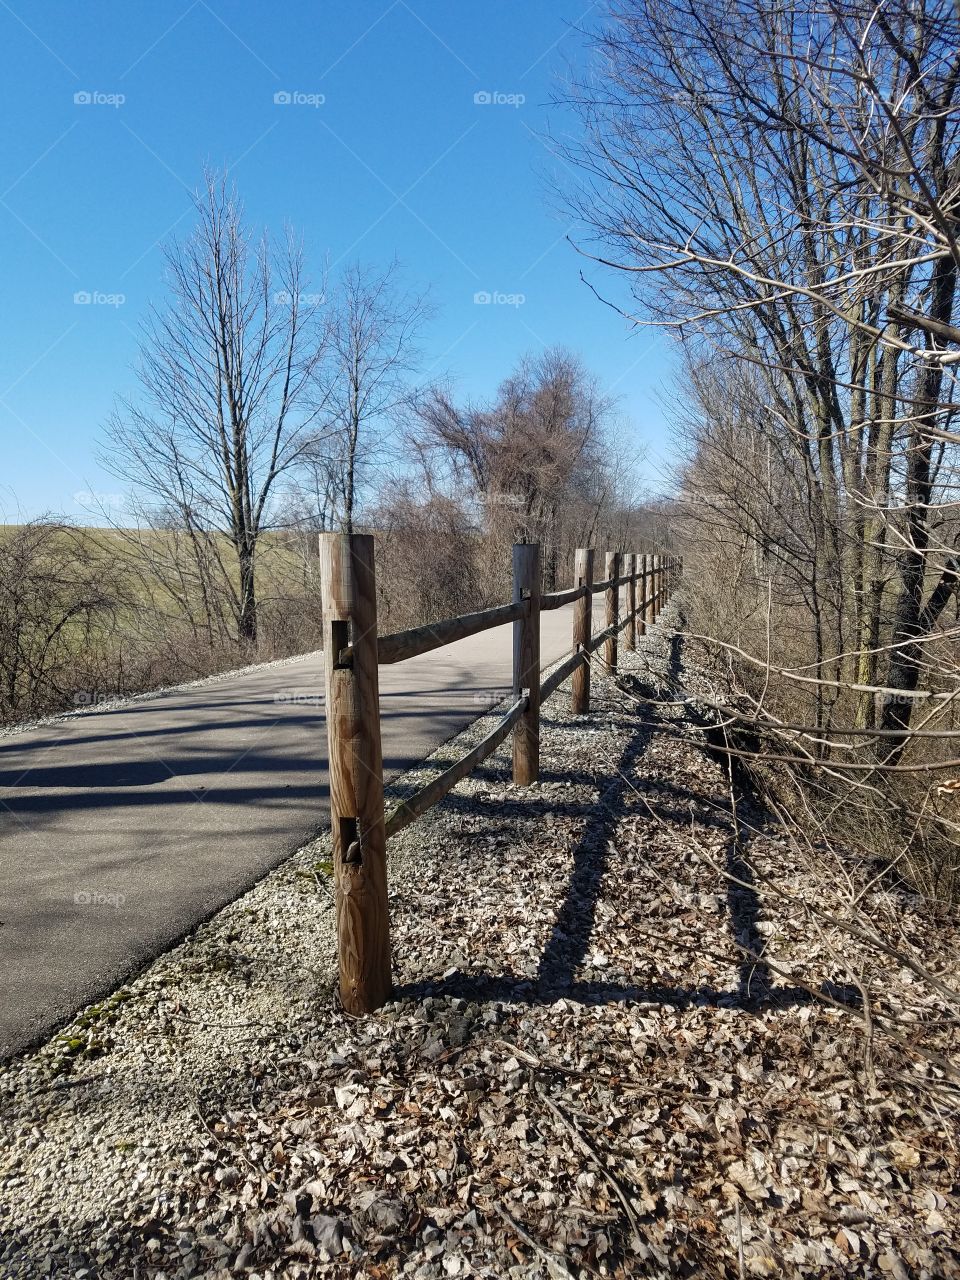 Bicycle and walking trail in rural Indiana late fall.